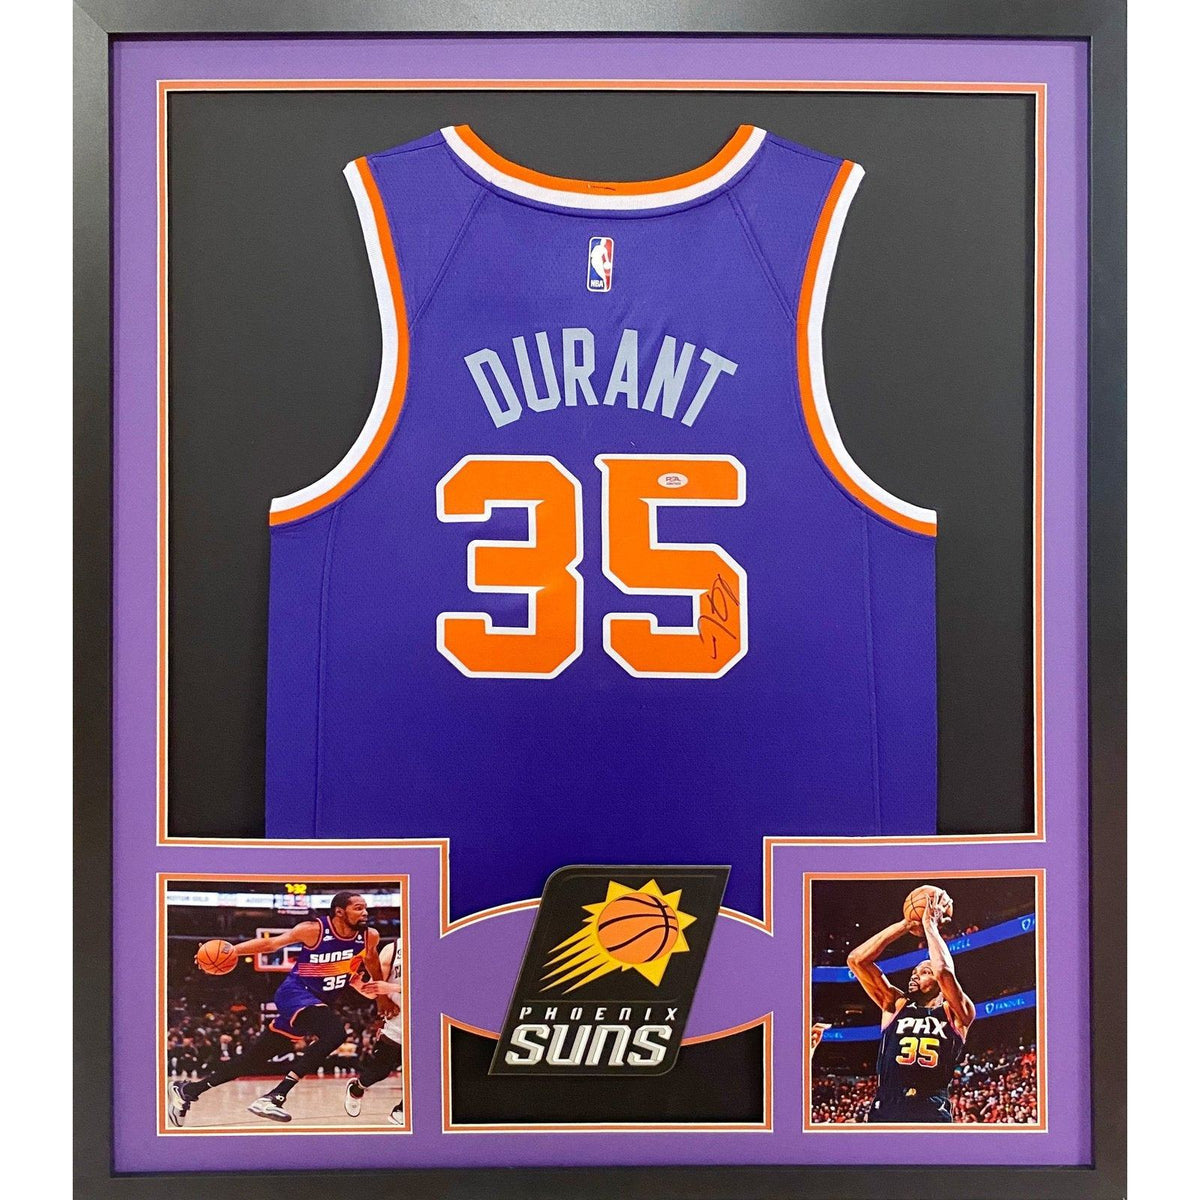 Kevin Durant Autographed Jerseys, Signed Kevin Durant Inscripted Jerseys